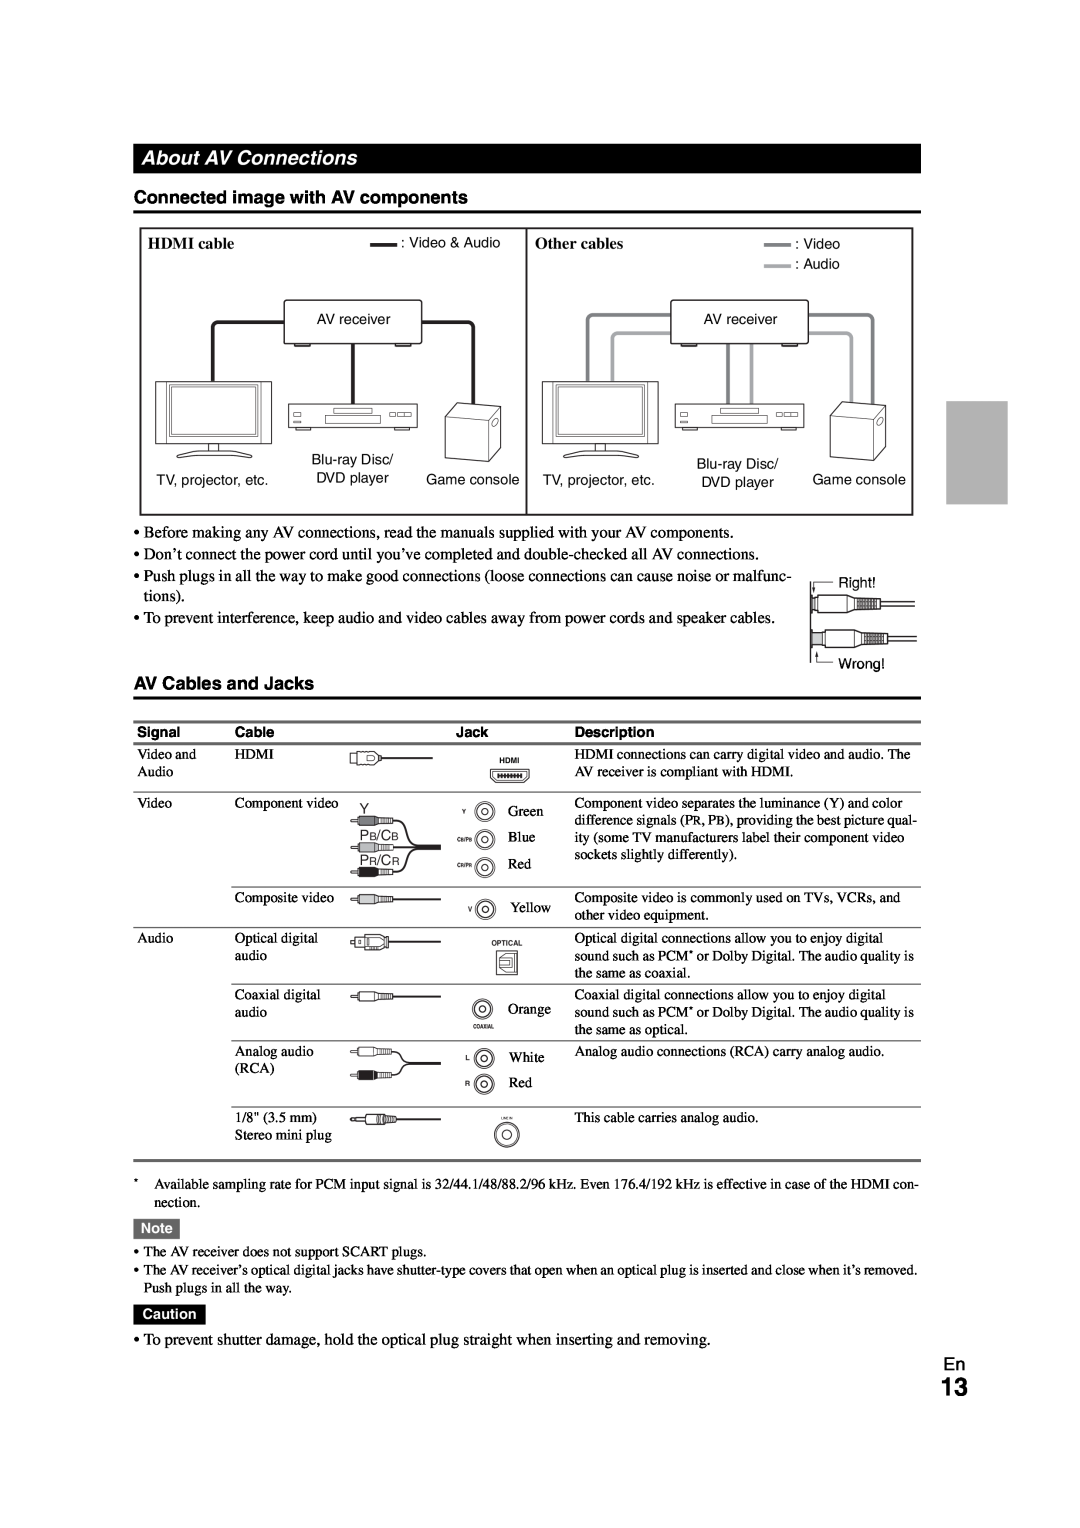 Onkyo SR308 instruction manual About AV Connections, Connected image with AV components, AV Cables and Jacks 